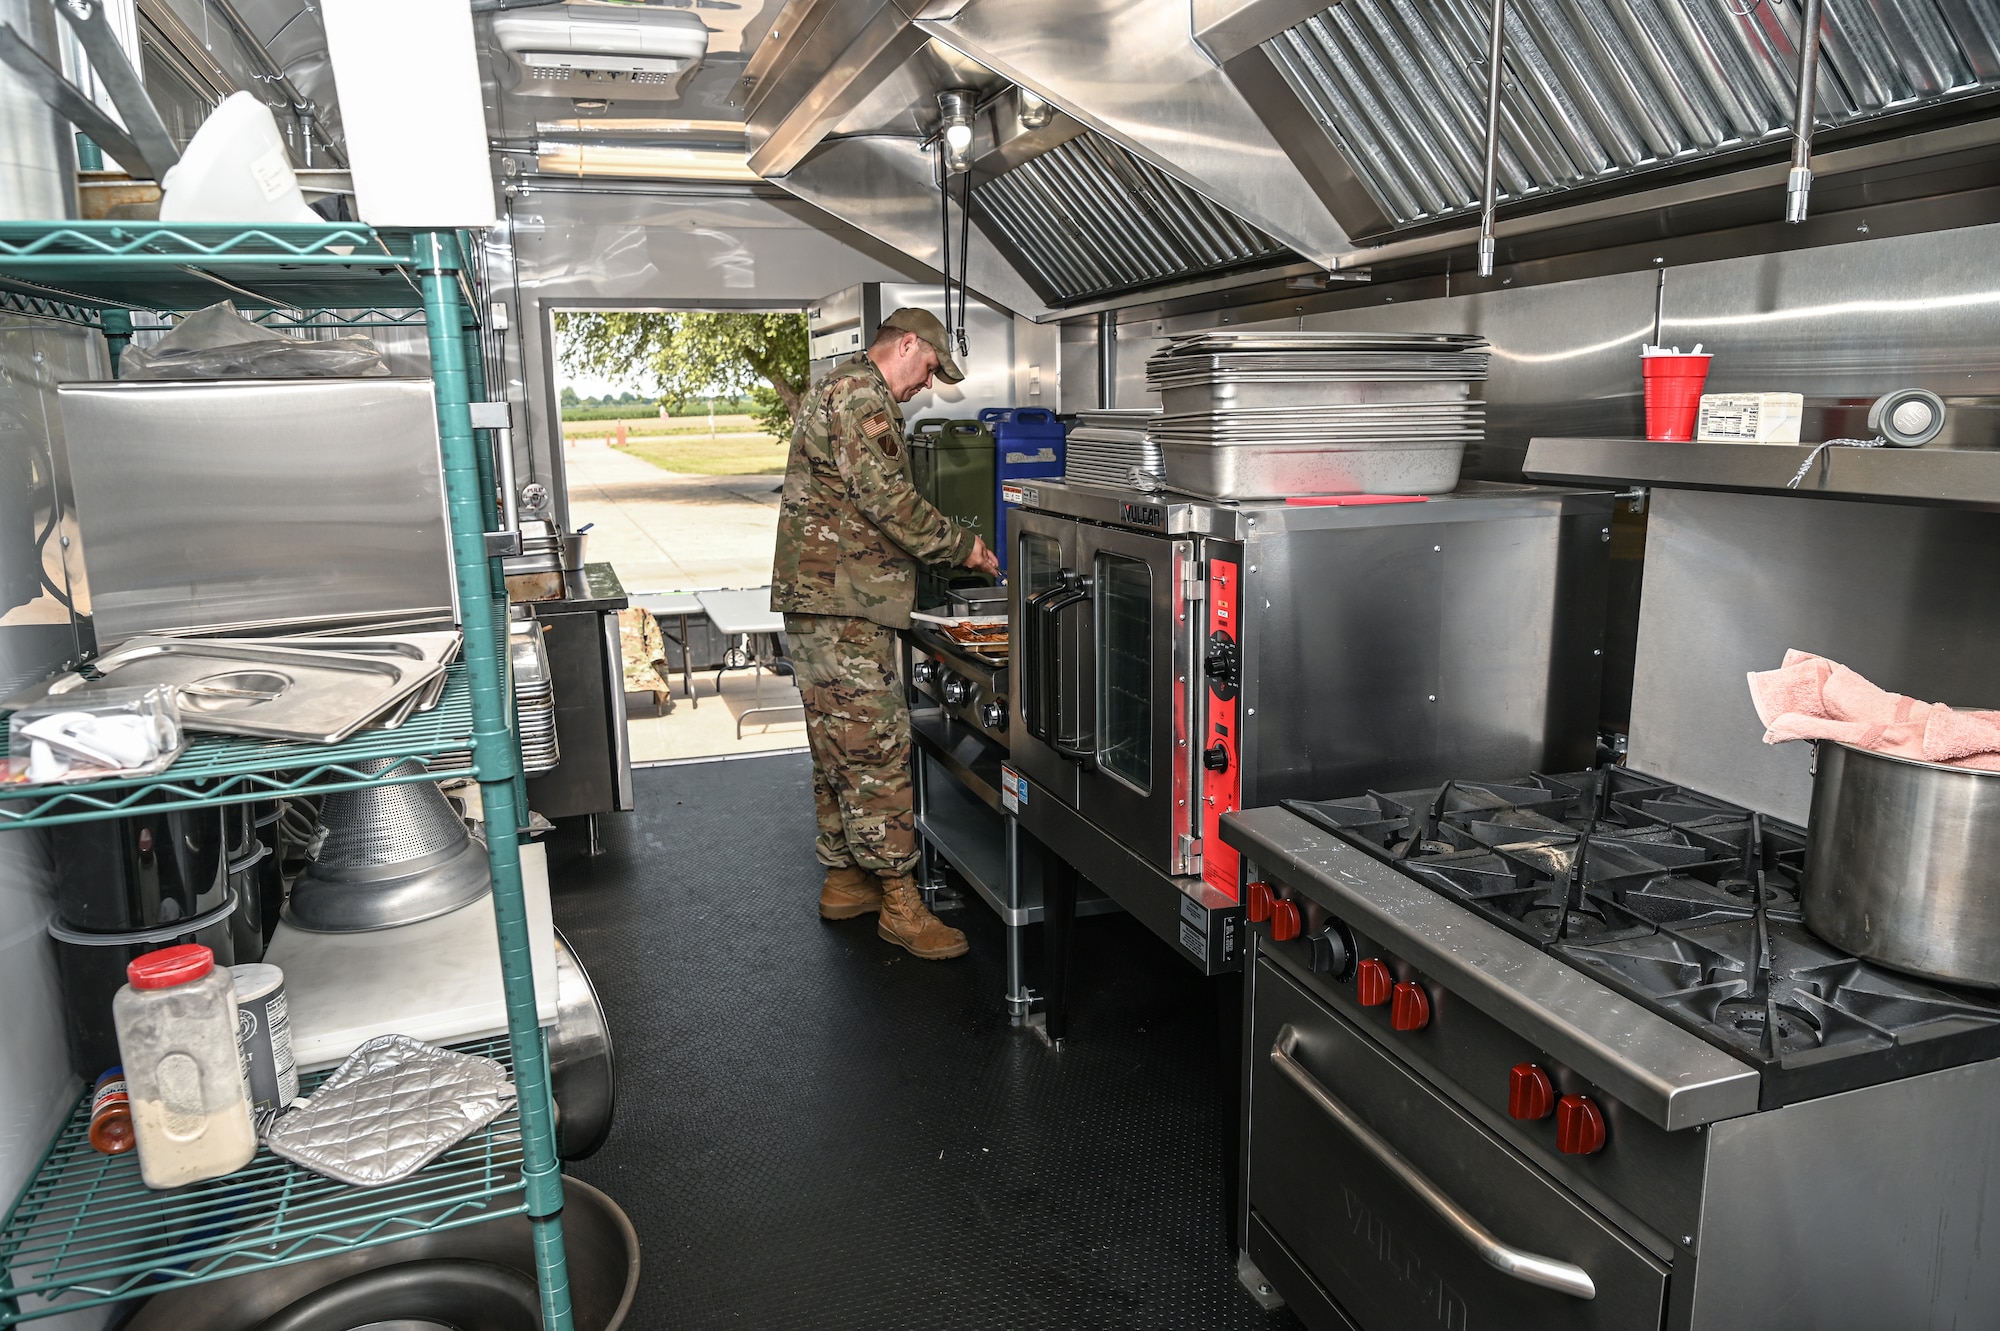 U.S. Air Force Staff. Sgt. Lonnie Obermark, a food service craftsman assigned to the 131st Bomb Wing, Missouri Air National Guard, fries beef for a meal during Operation Healthy Delta Innovative Readiness Training Program at Sikeston, Missouri, June 13, 2023. Services Airmen gained real-world adaptability experience while serving more than 800 meals per day to service members involved in the DOD sponsored program that was designed to build relationships with local communities by providing key medical, dental, and optometry services at no cost. (U.S. Air National Guard photo by Airman 1st Class Danielle Dawson)